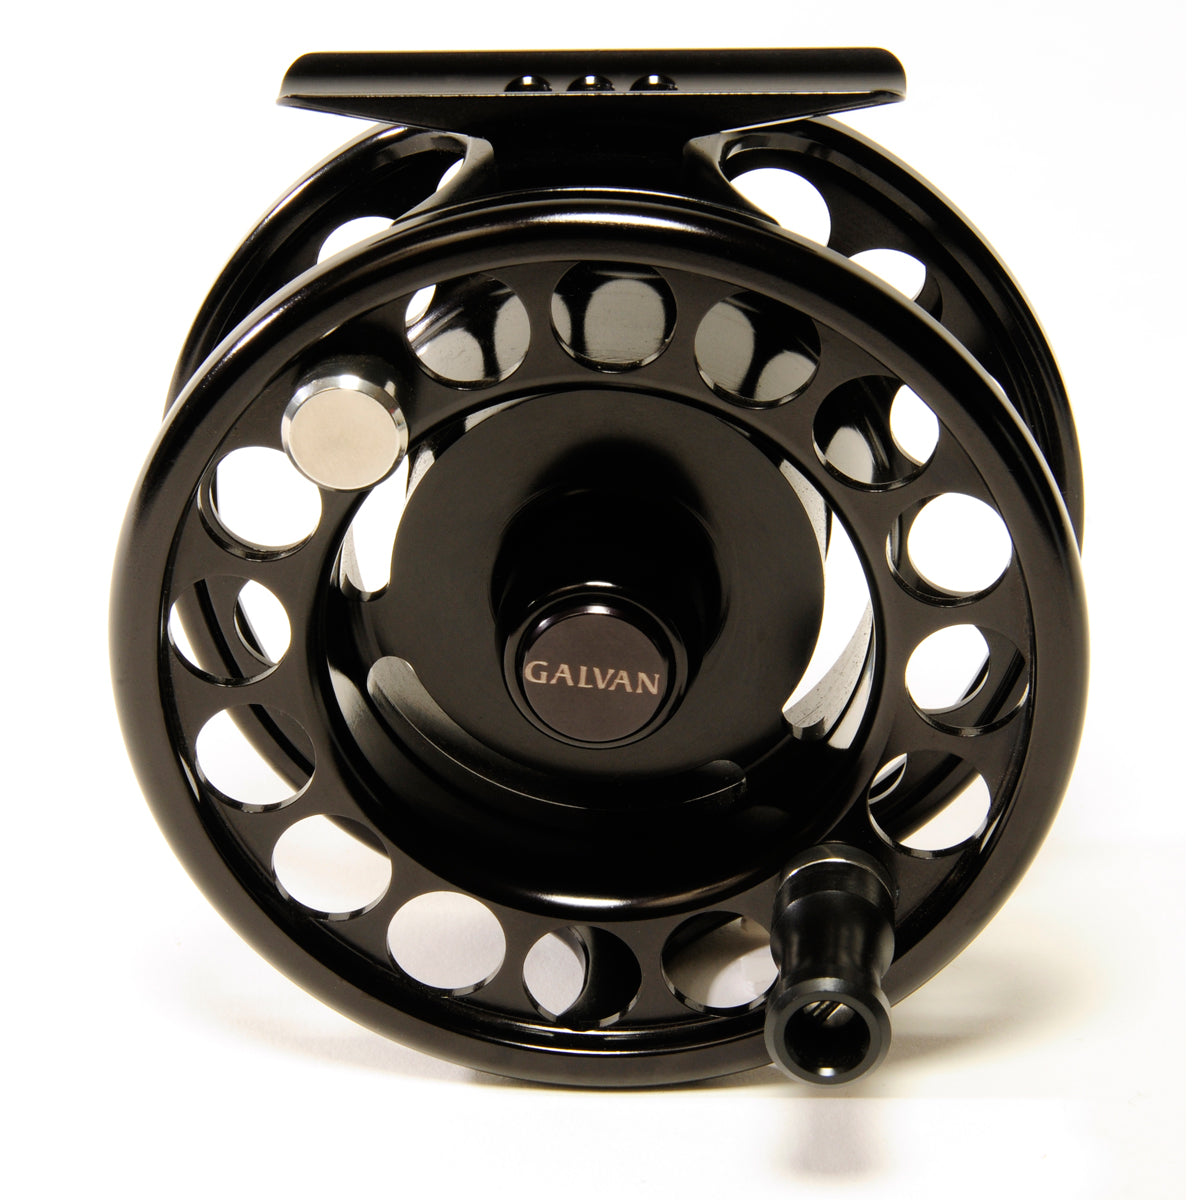 RUSH-3 LIGHT BLACK REEL 3 WT. – Lost Coast Outfitters